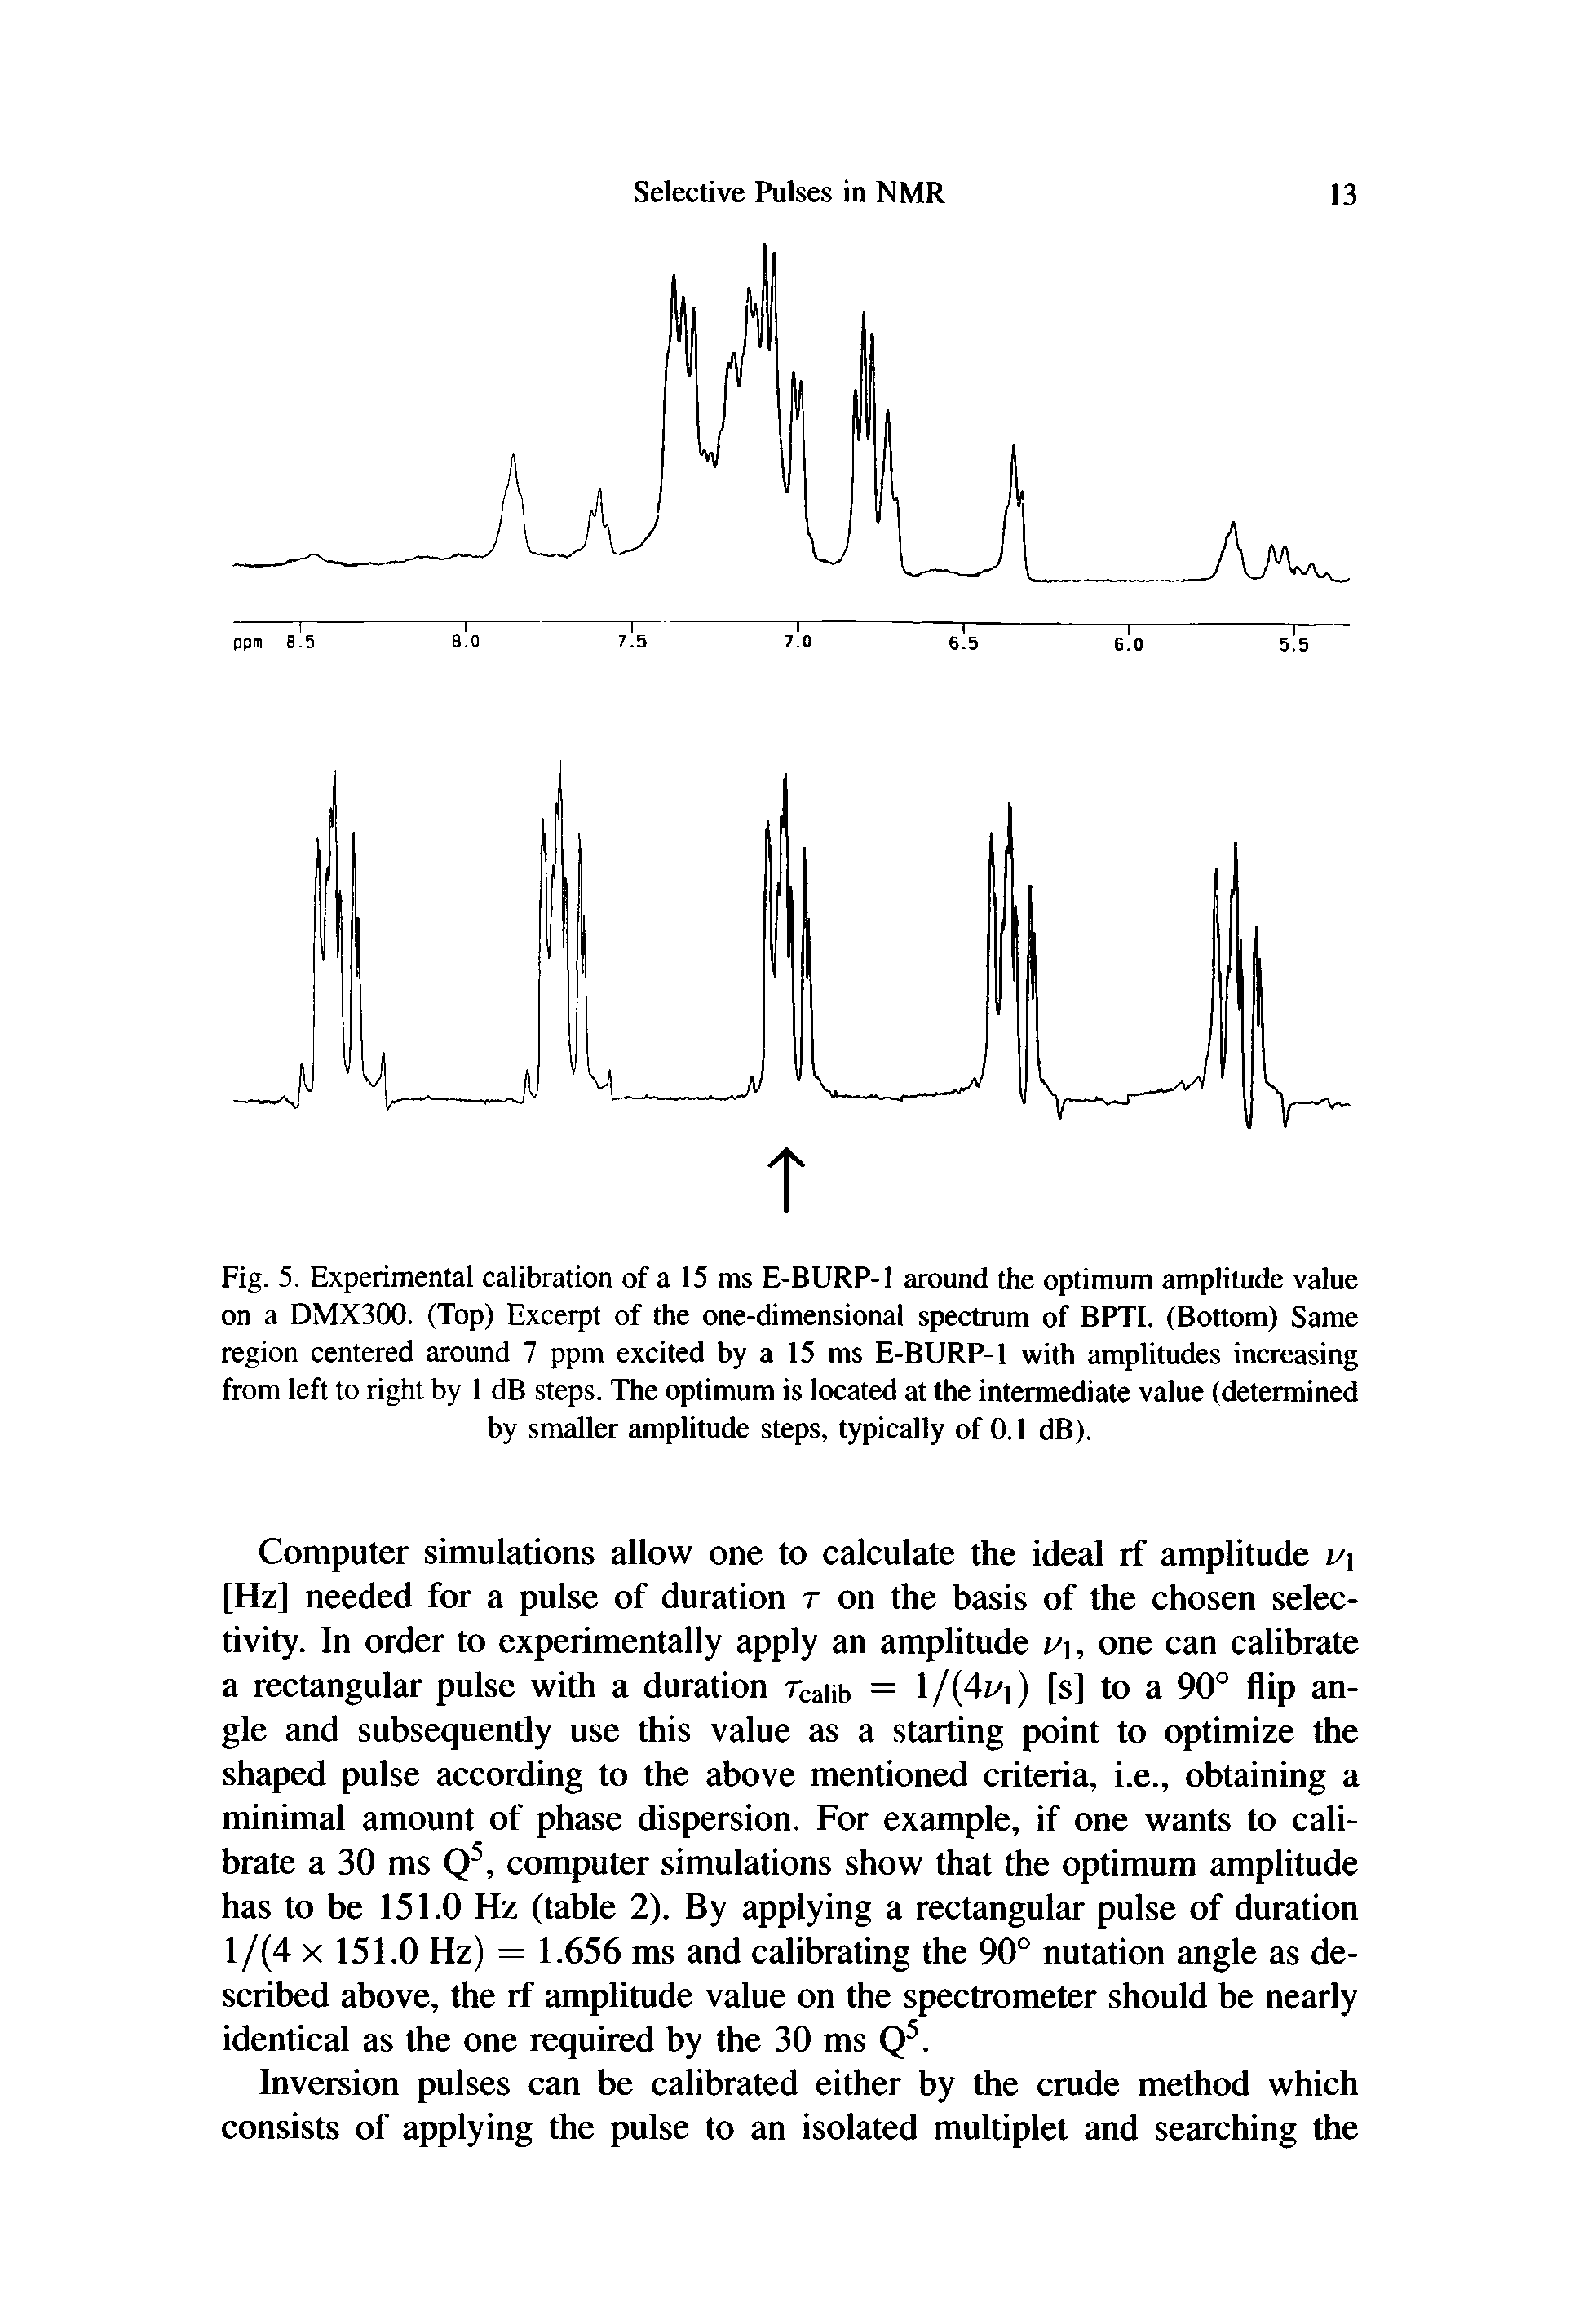 Fig. 5. Experimental calibration of a 15 ms E-BURP-1 around the optimum amplitude value on a DMX300. (Top) Excerpt of the one-dimensional spectrum of BPTI. (Bottom) Same region centered around 7 ppm excited by a 15 ms E-BURP-1 with amplitudes increasing from left to right by 1 dB steps. The optimum is located at the intermediate value (determined by smaller amplitude steps, typically of 0.1 dB).